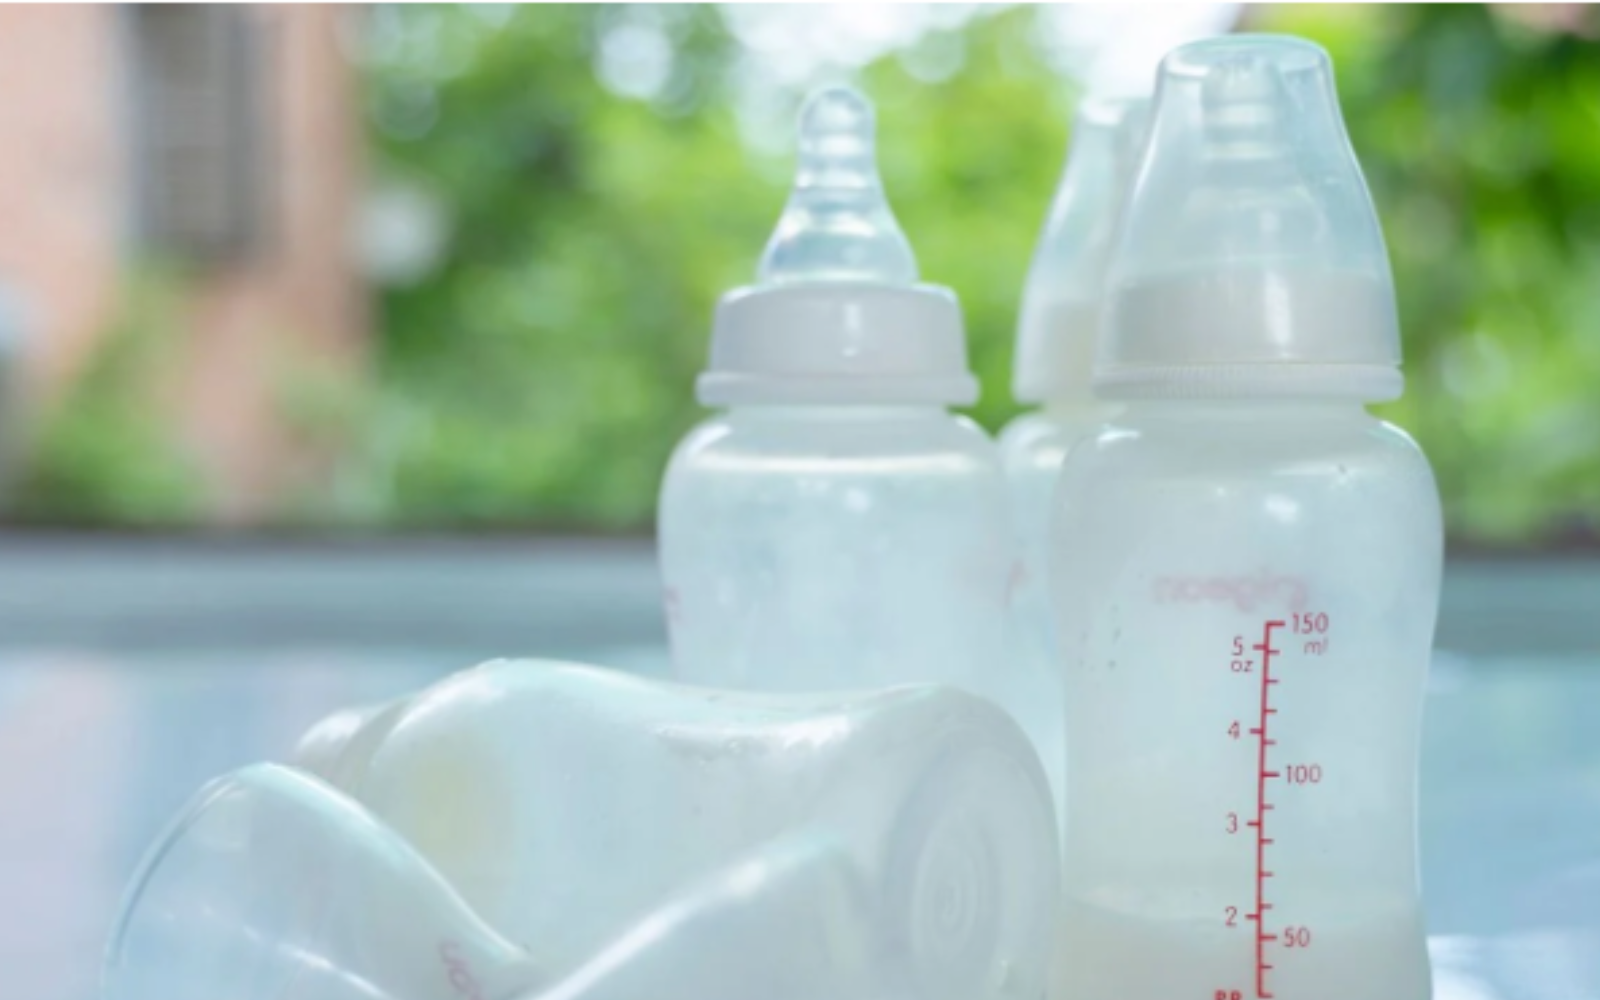 Is BPA-free safe? A story about an Australian mum disrupting the baby bottle industry